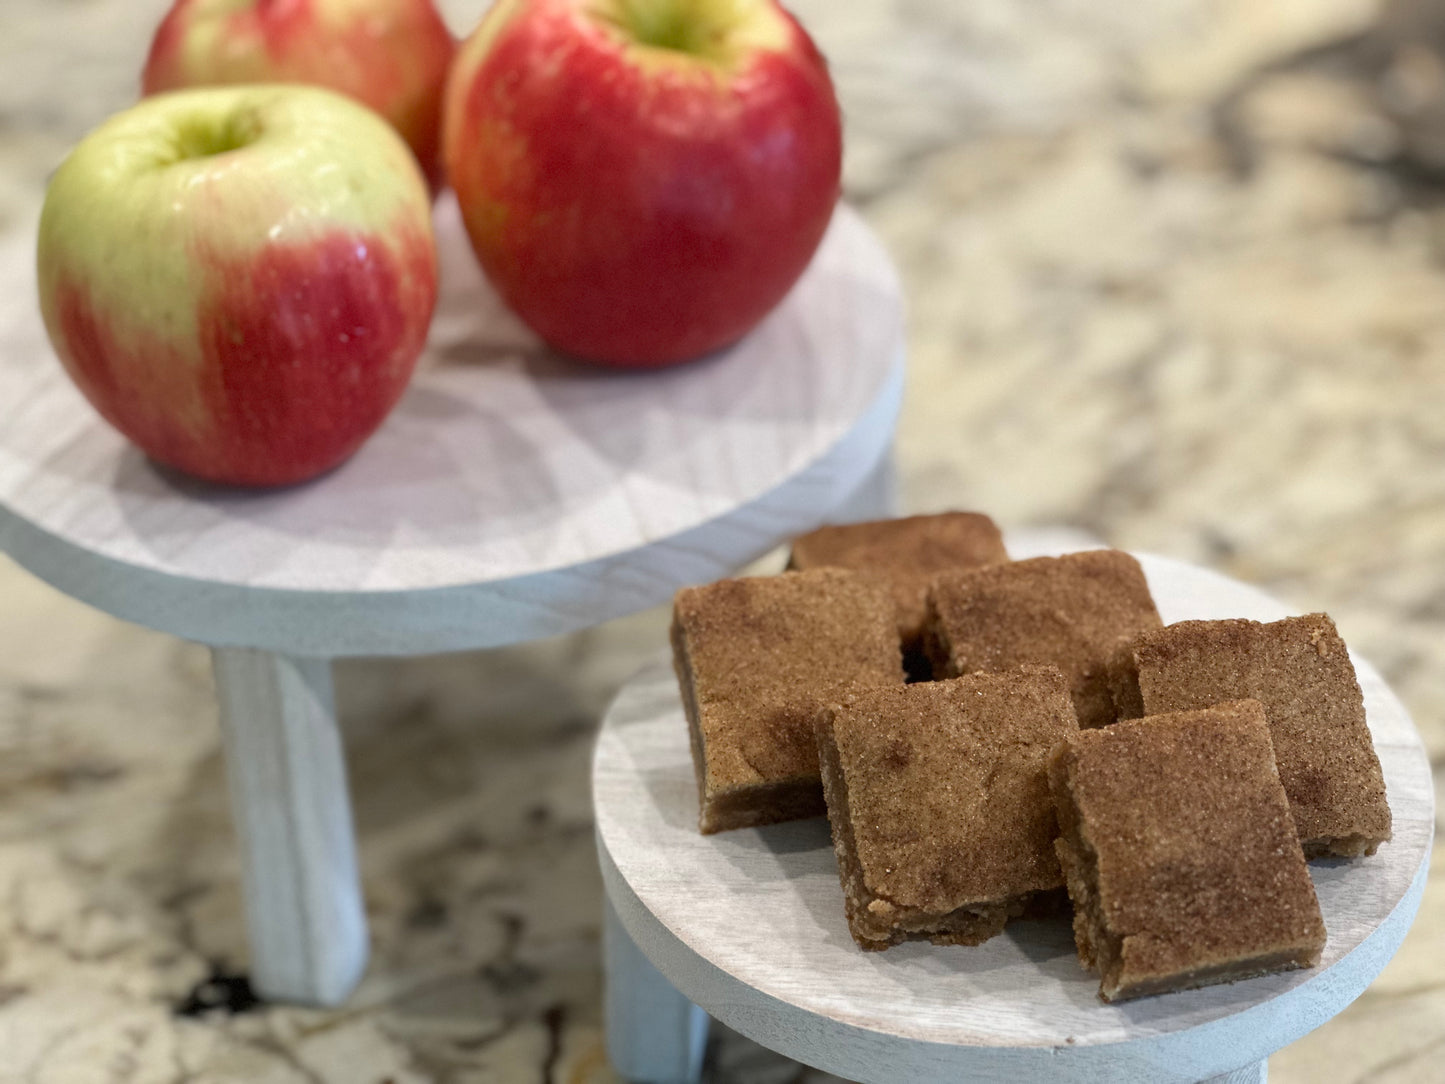 Apple Cider Chewy Bars (2 dozen) | Order by Wednesday 12/6, Pick Up on Friday 12/8 3:30-5:30